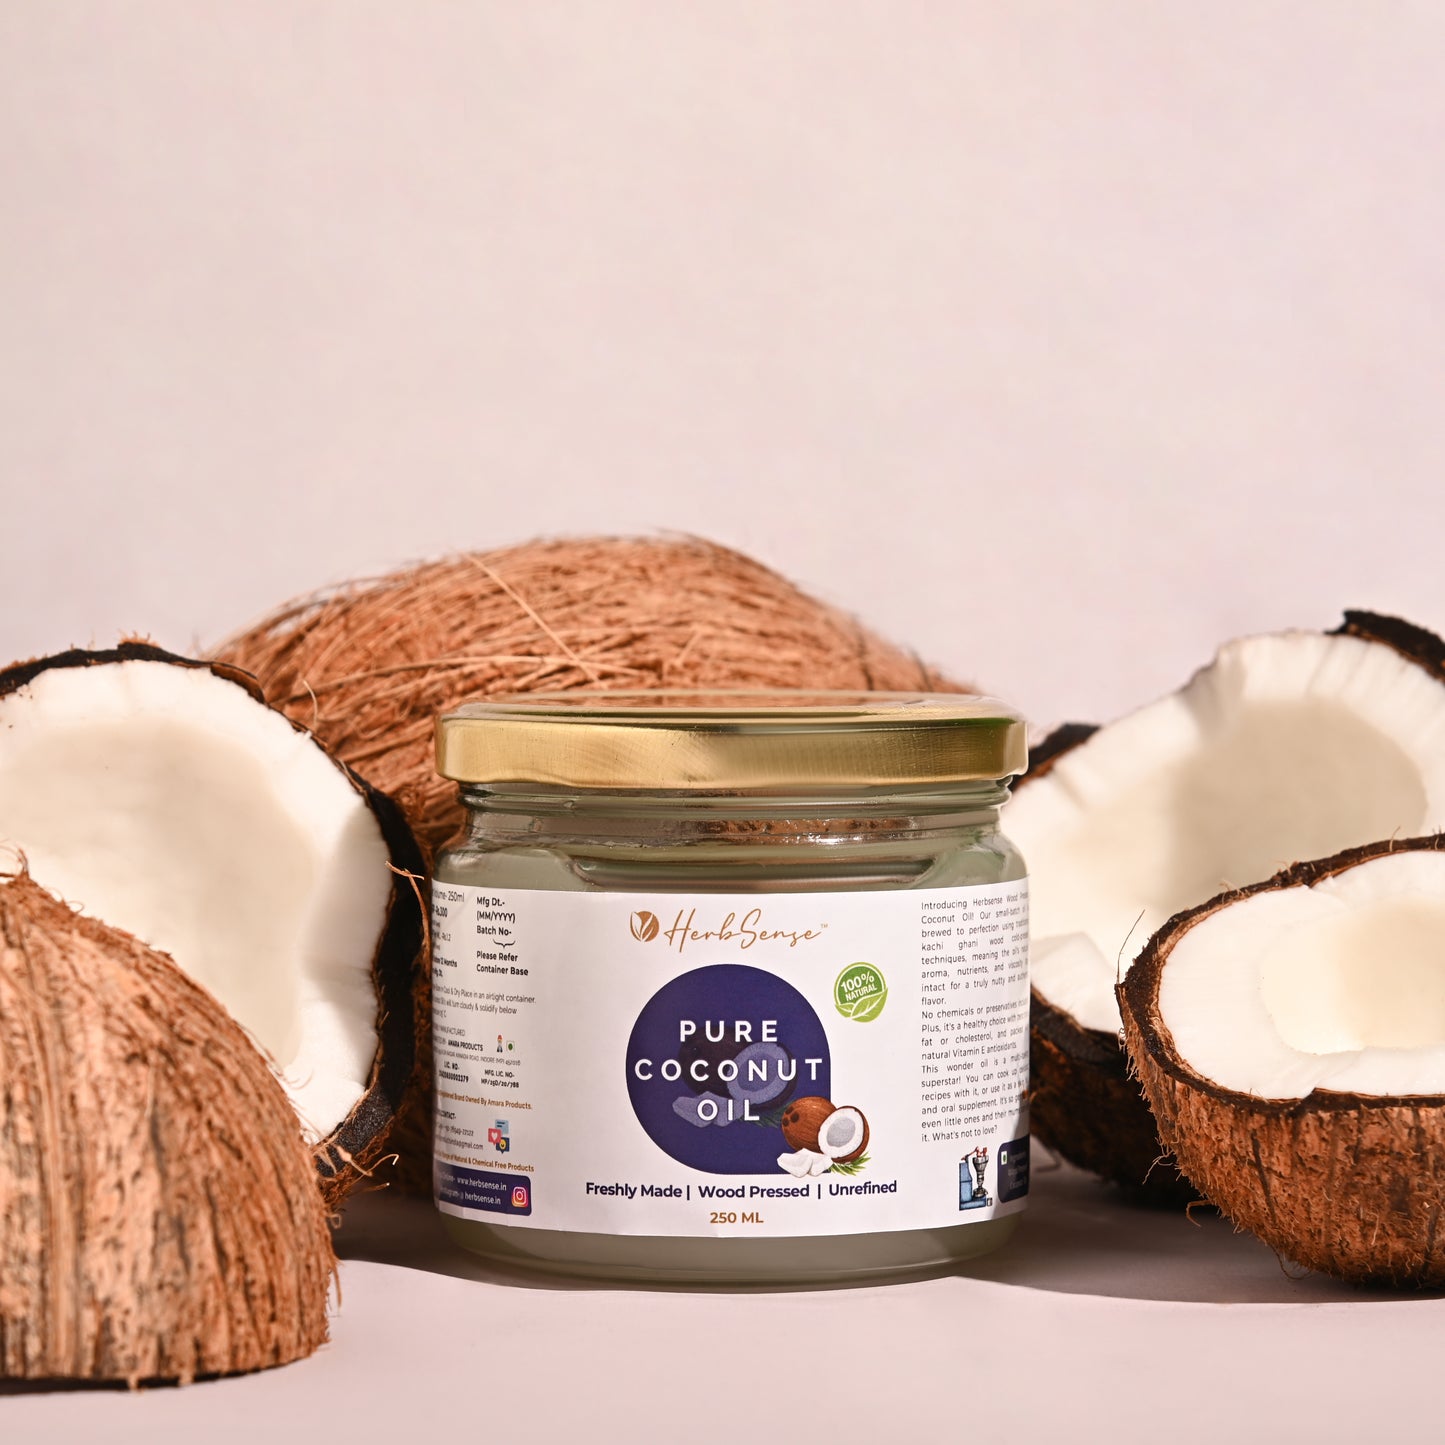 Wood Pressed Coconut Oil- 100% Natural Cloth Filtered  | For Skin, Hair, Cooking as well as a dietary supplement